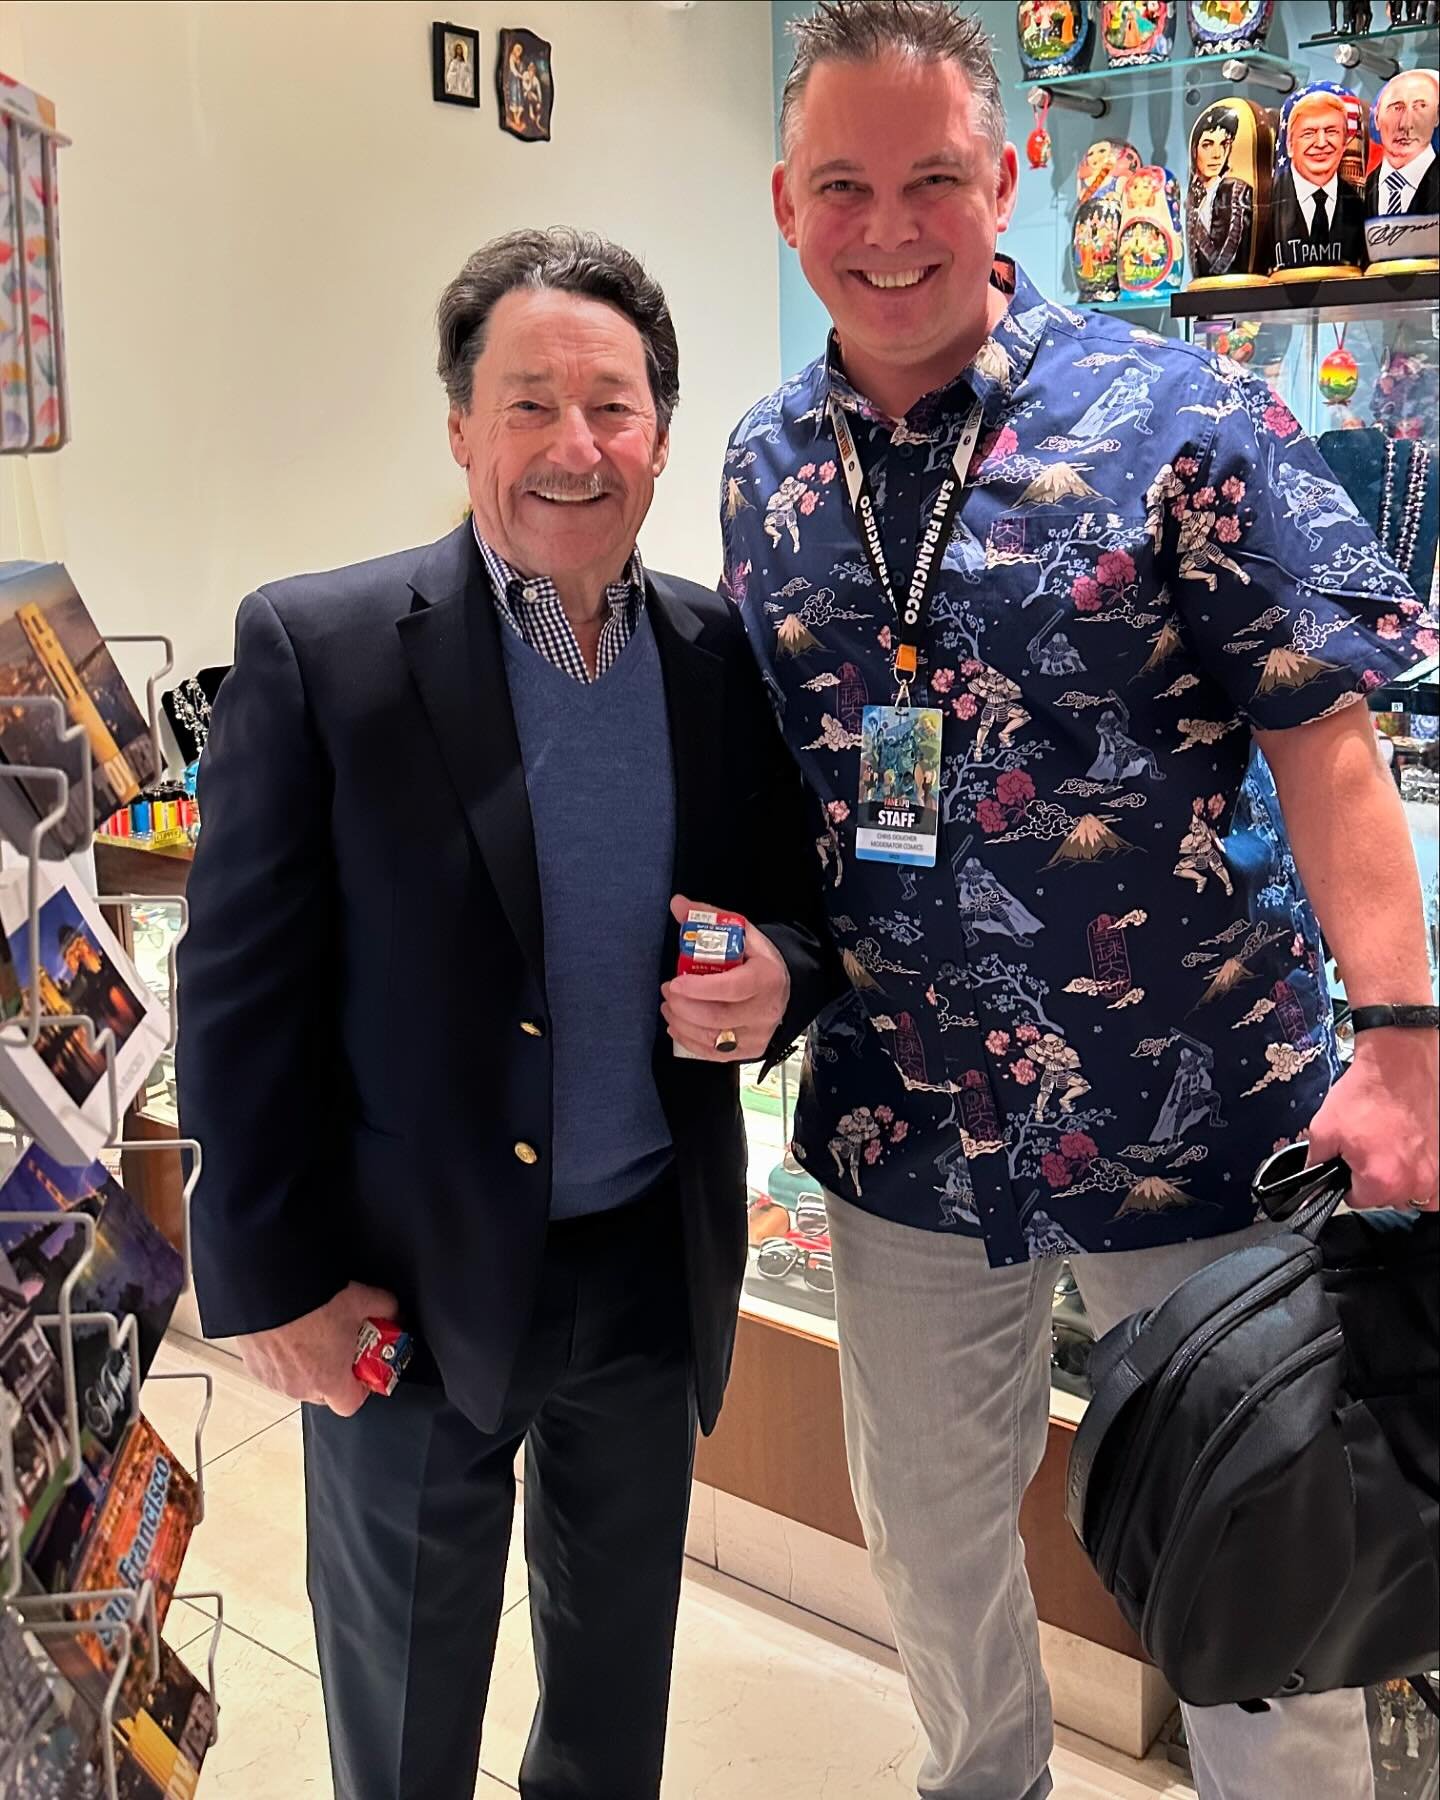 As @transformersofficial celebrates its 40th anniversary, here&rsquo;s a snap of my random (and awesome!) meeting with Optimus Prime himself&mdash;Canadian voice actor, Peter Cullen&mdash;in San Francisco (November 2023).
#ConventionLife #FanExpoSanF